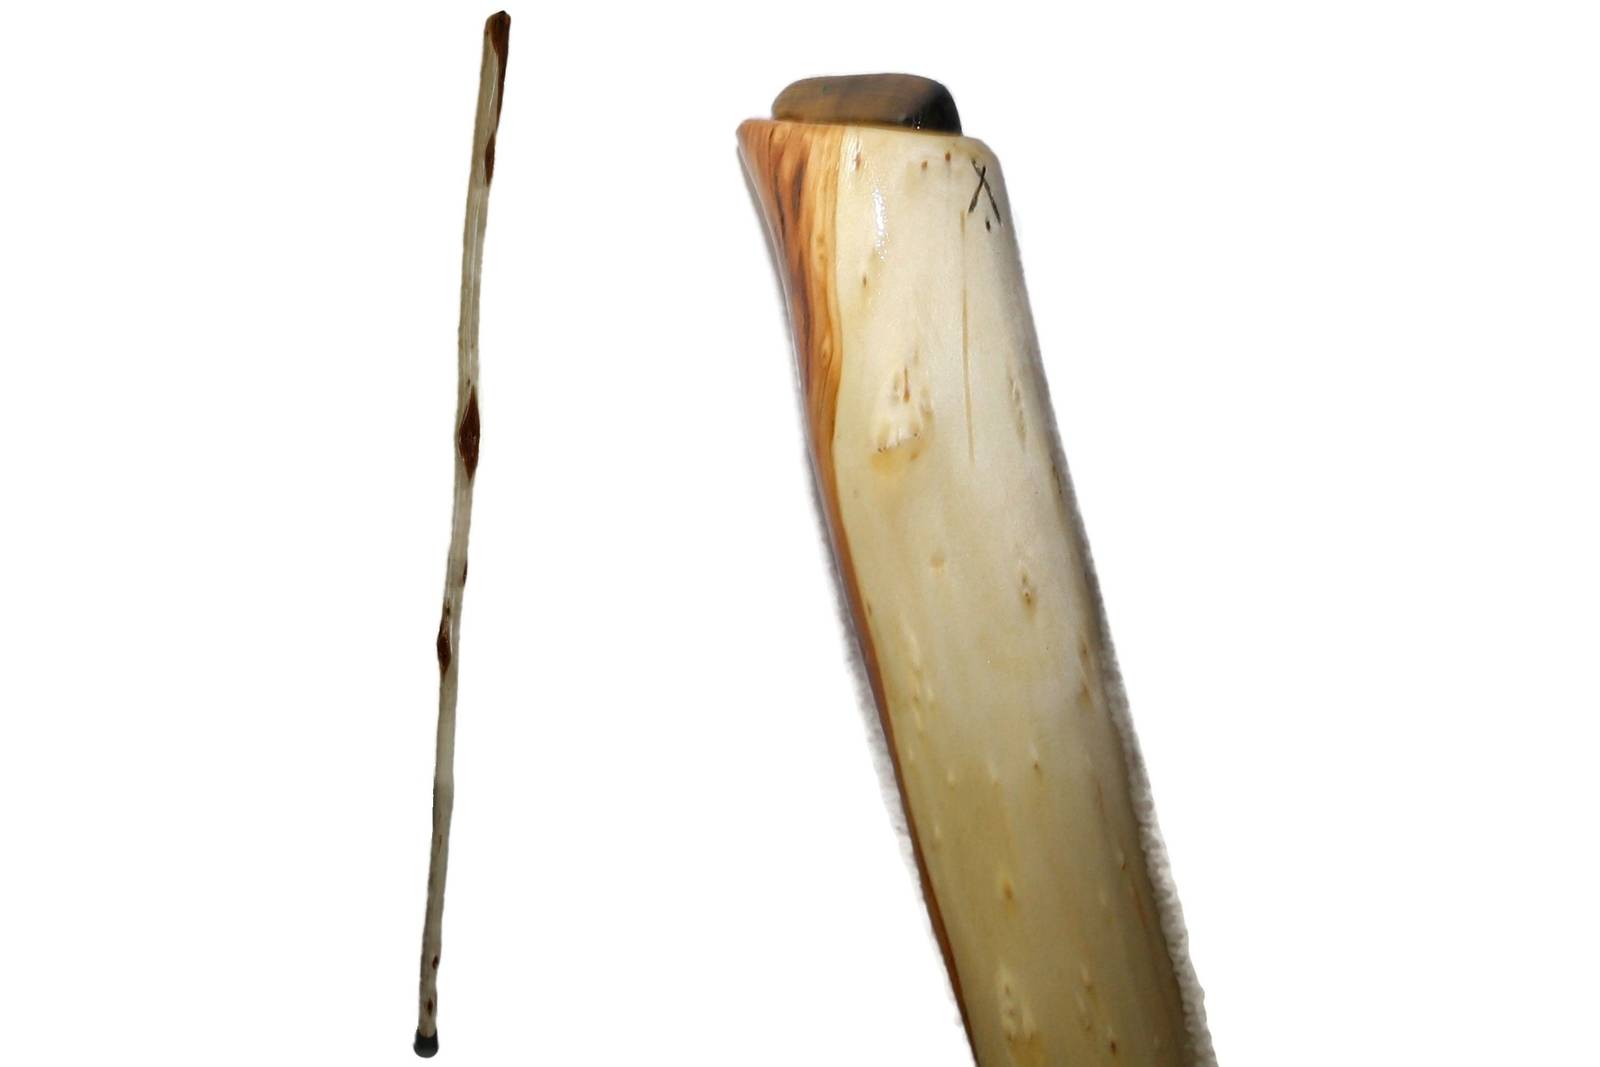 Primary image for 65in Straight Wooden Hiking Staff, Inlaid Polished Tiger's Eye, Diamond Willow